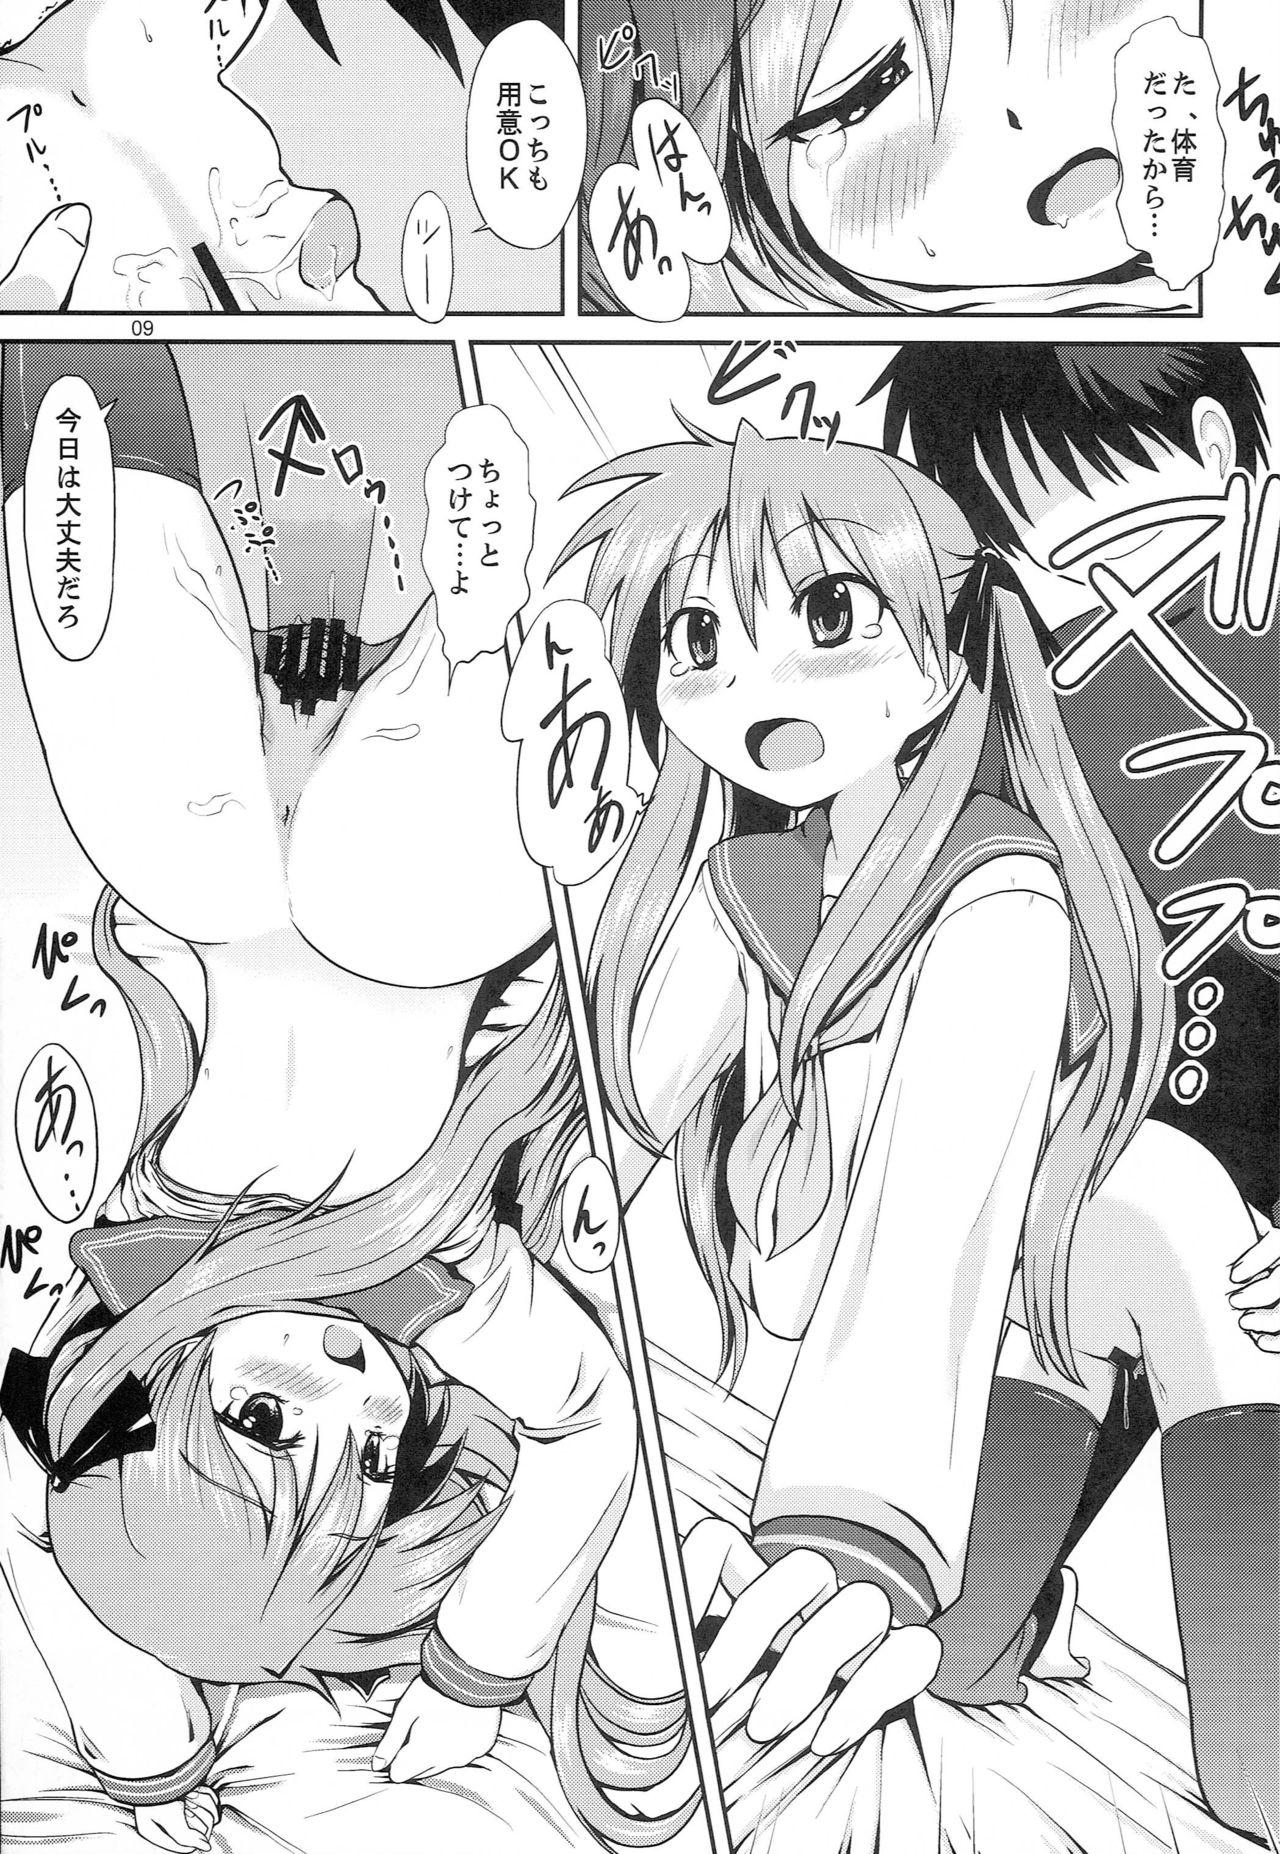 Perra Houkago no Kagamin - Lucky star Highheels - Page 8